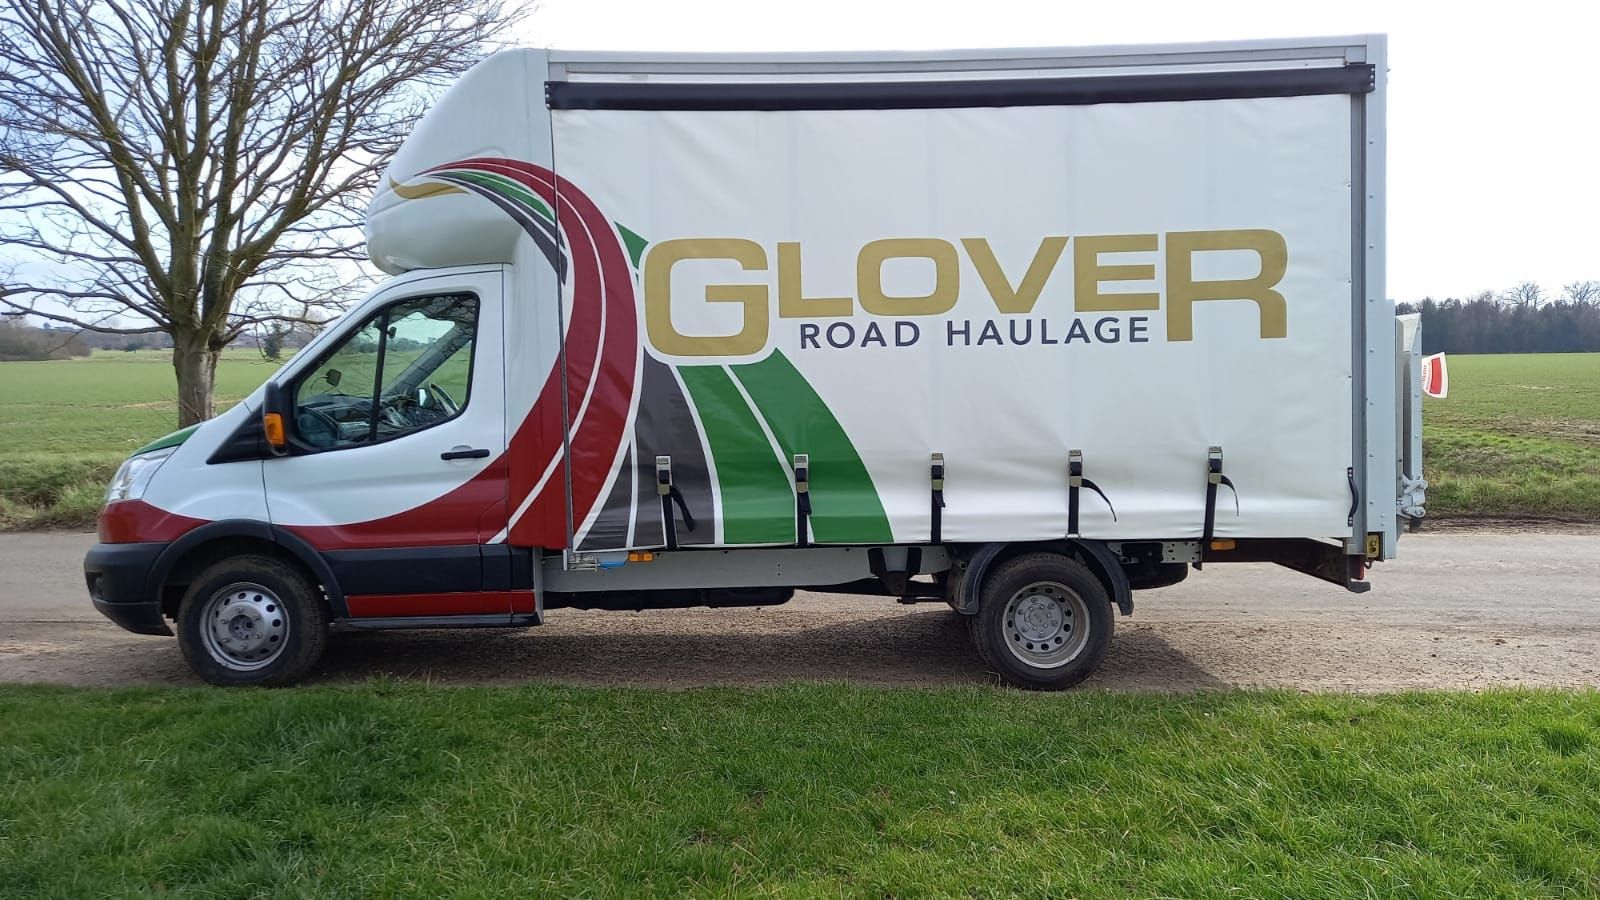 Glover van parked by the side road